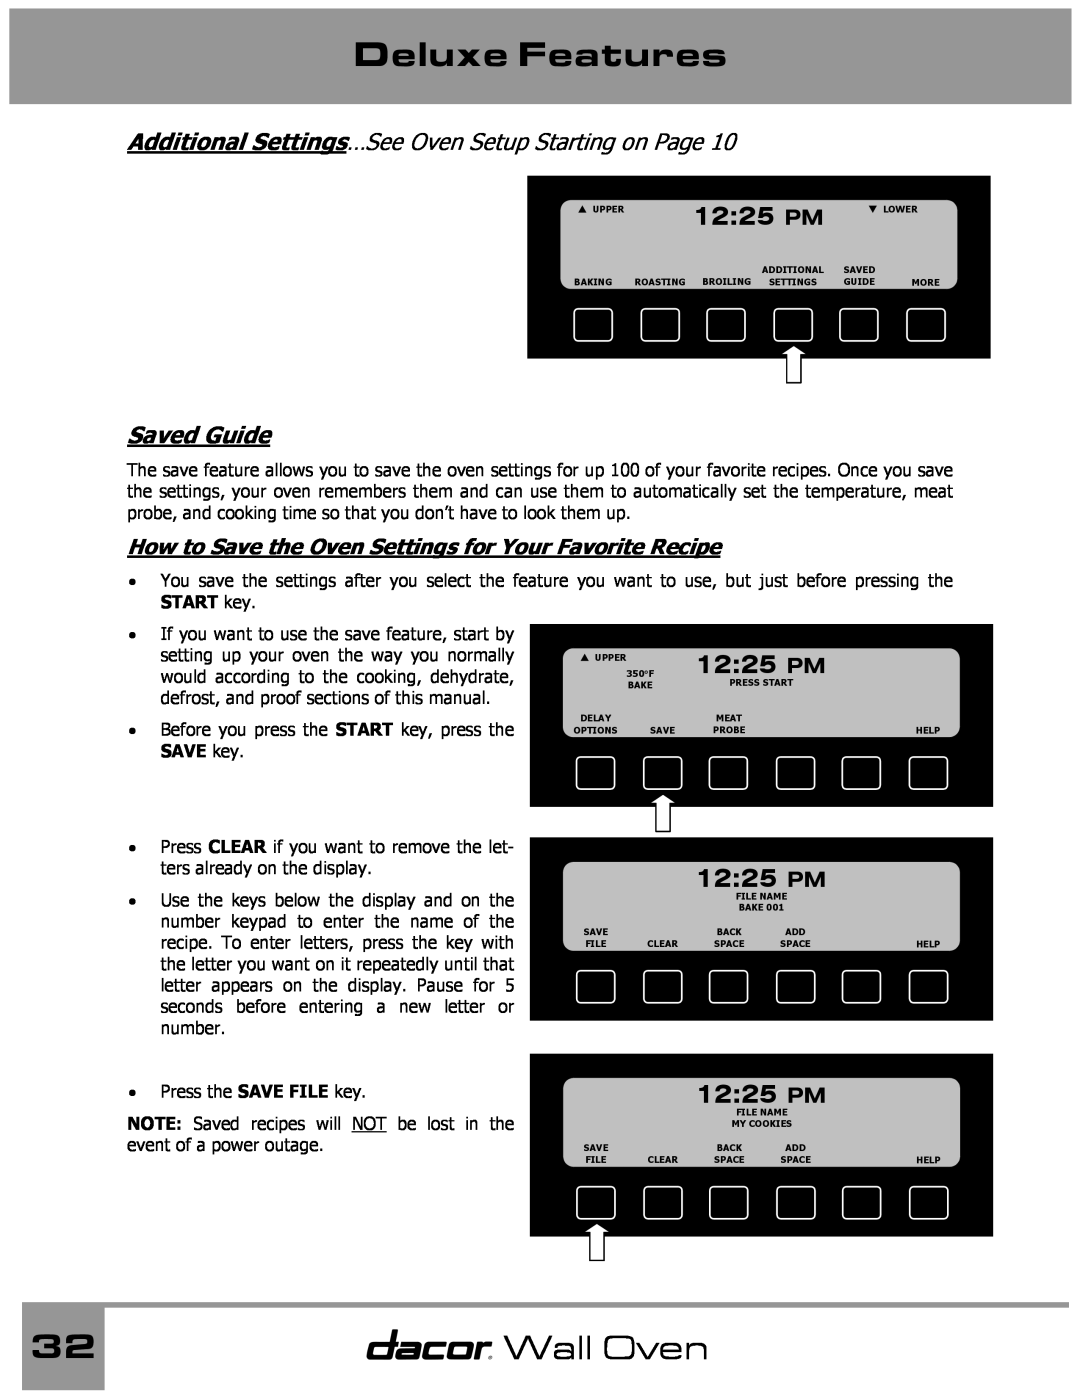 Dacor Wall Oven manual Saved Guide, How to Save the Oven Settings for Your Favorite Recipe, Deluxe Features, 1225 PM 